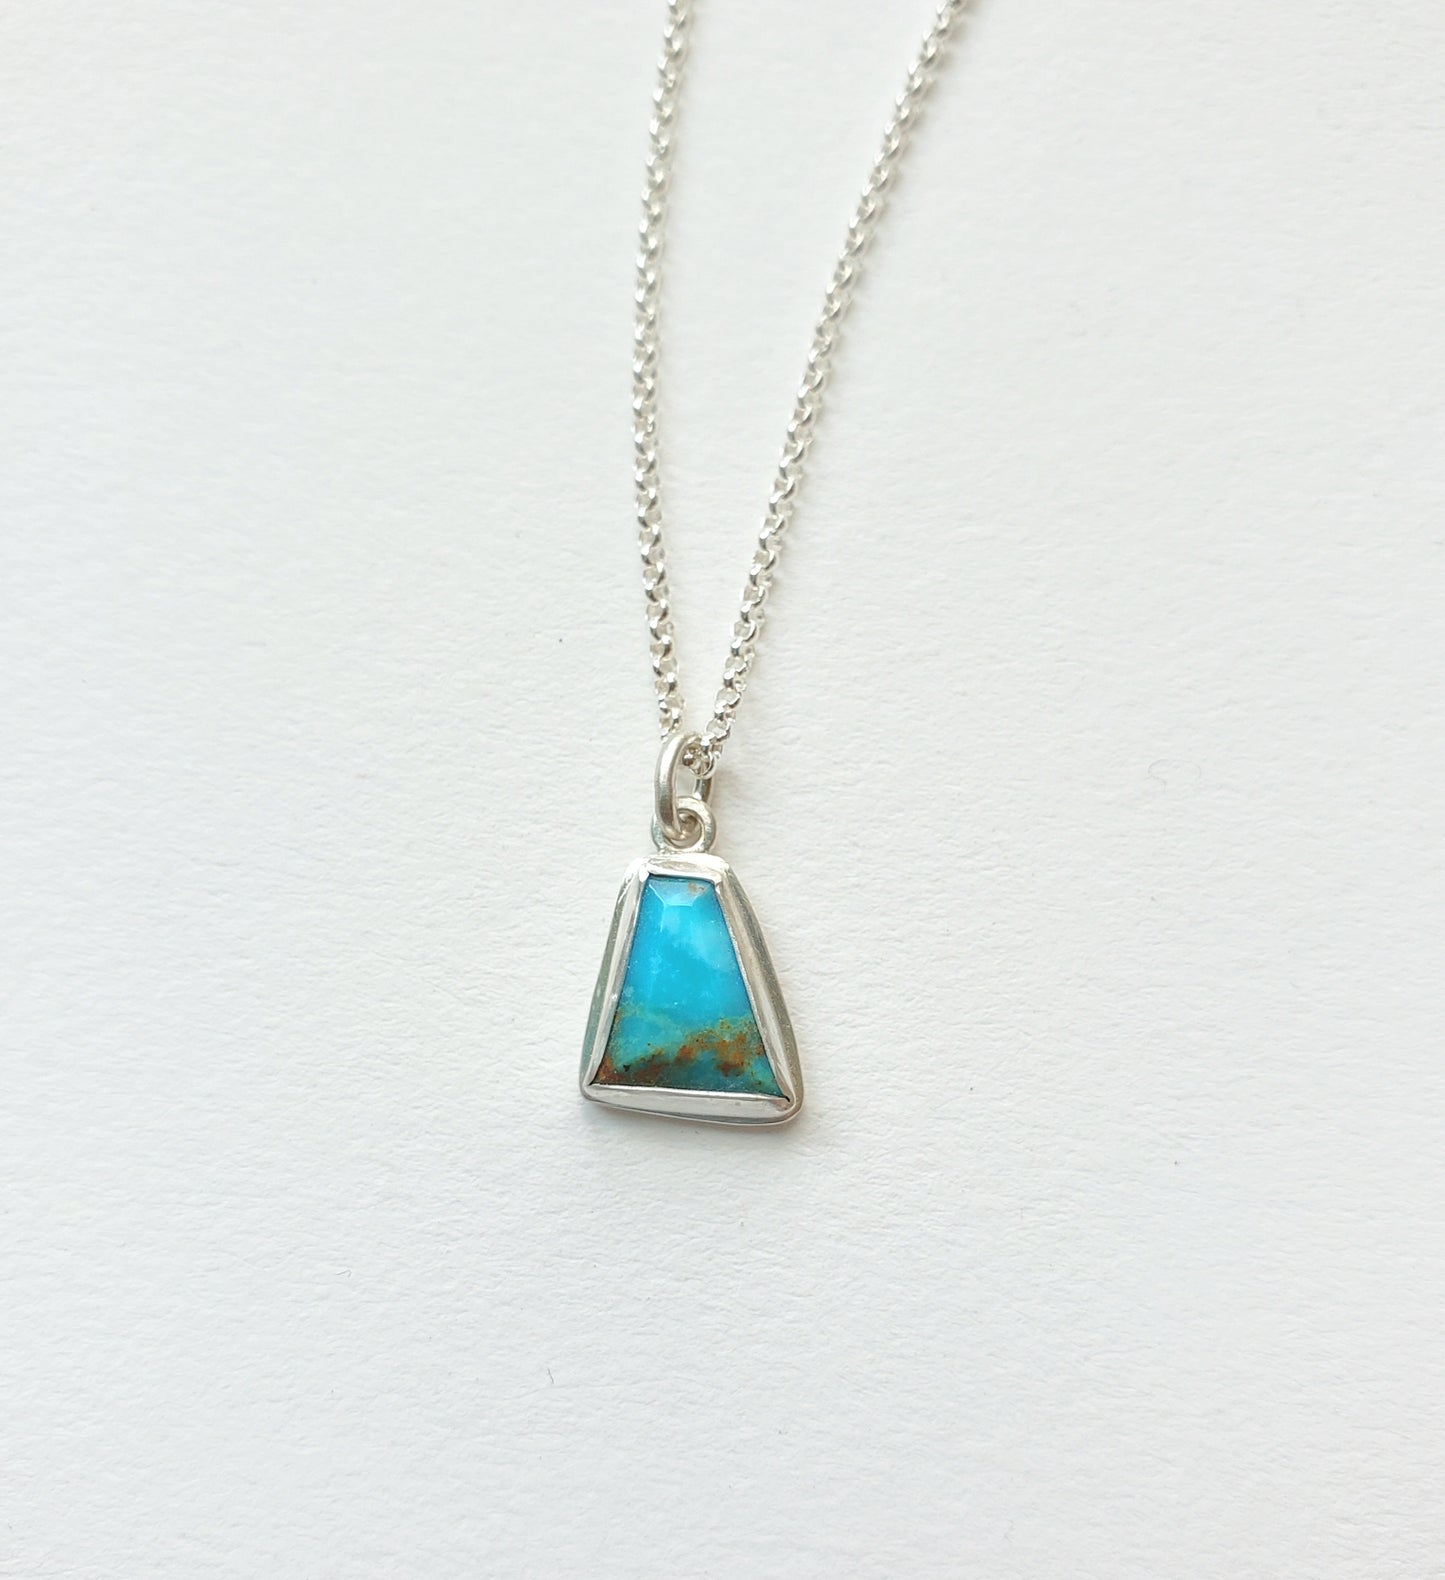 Turquoise Chip Necklace